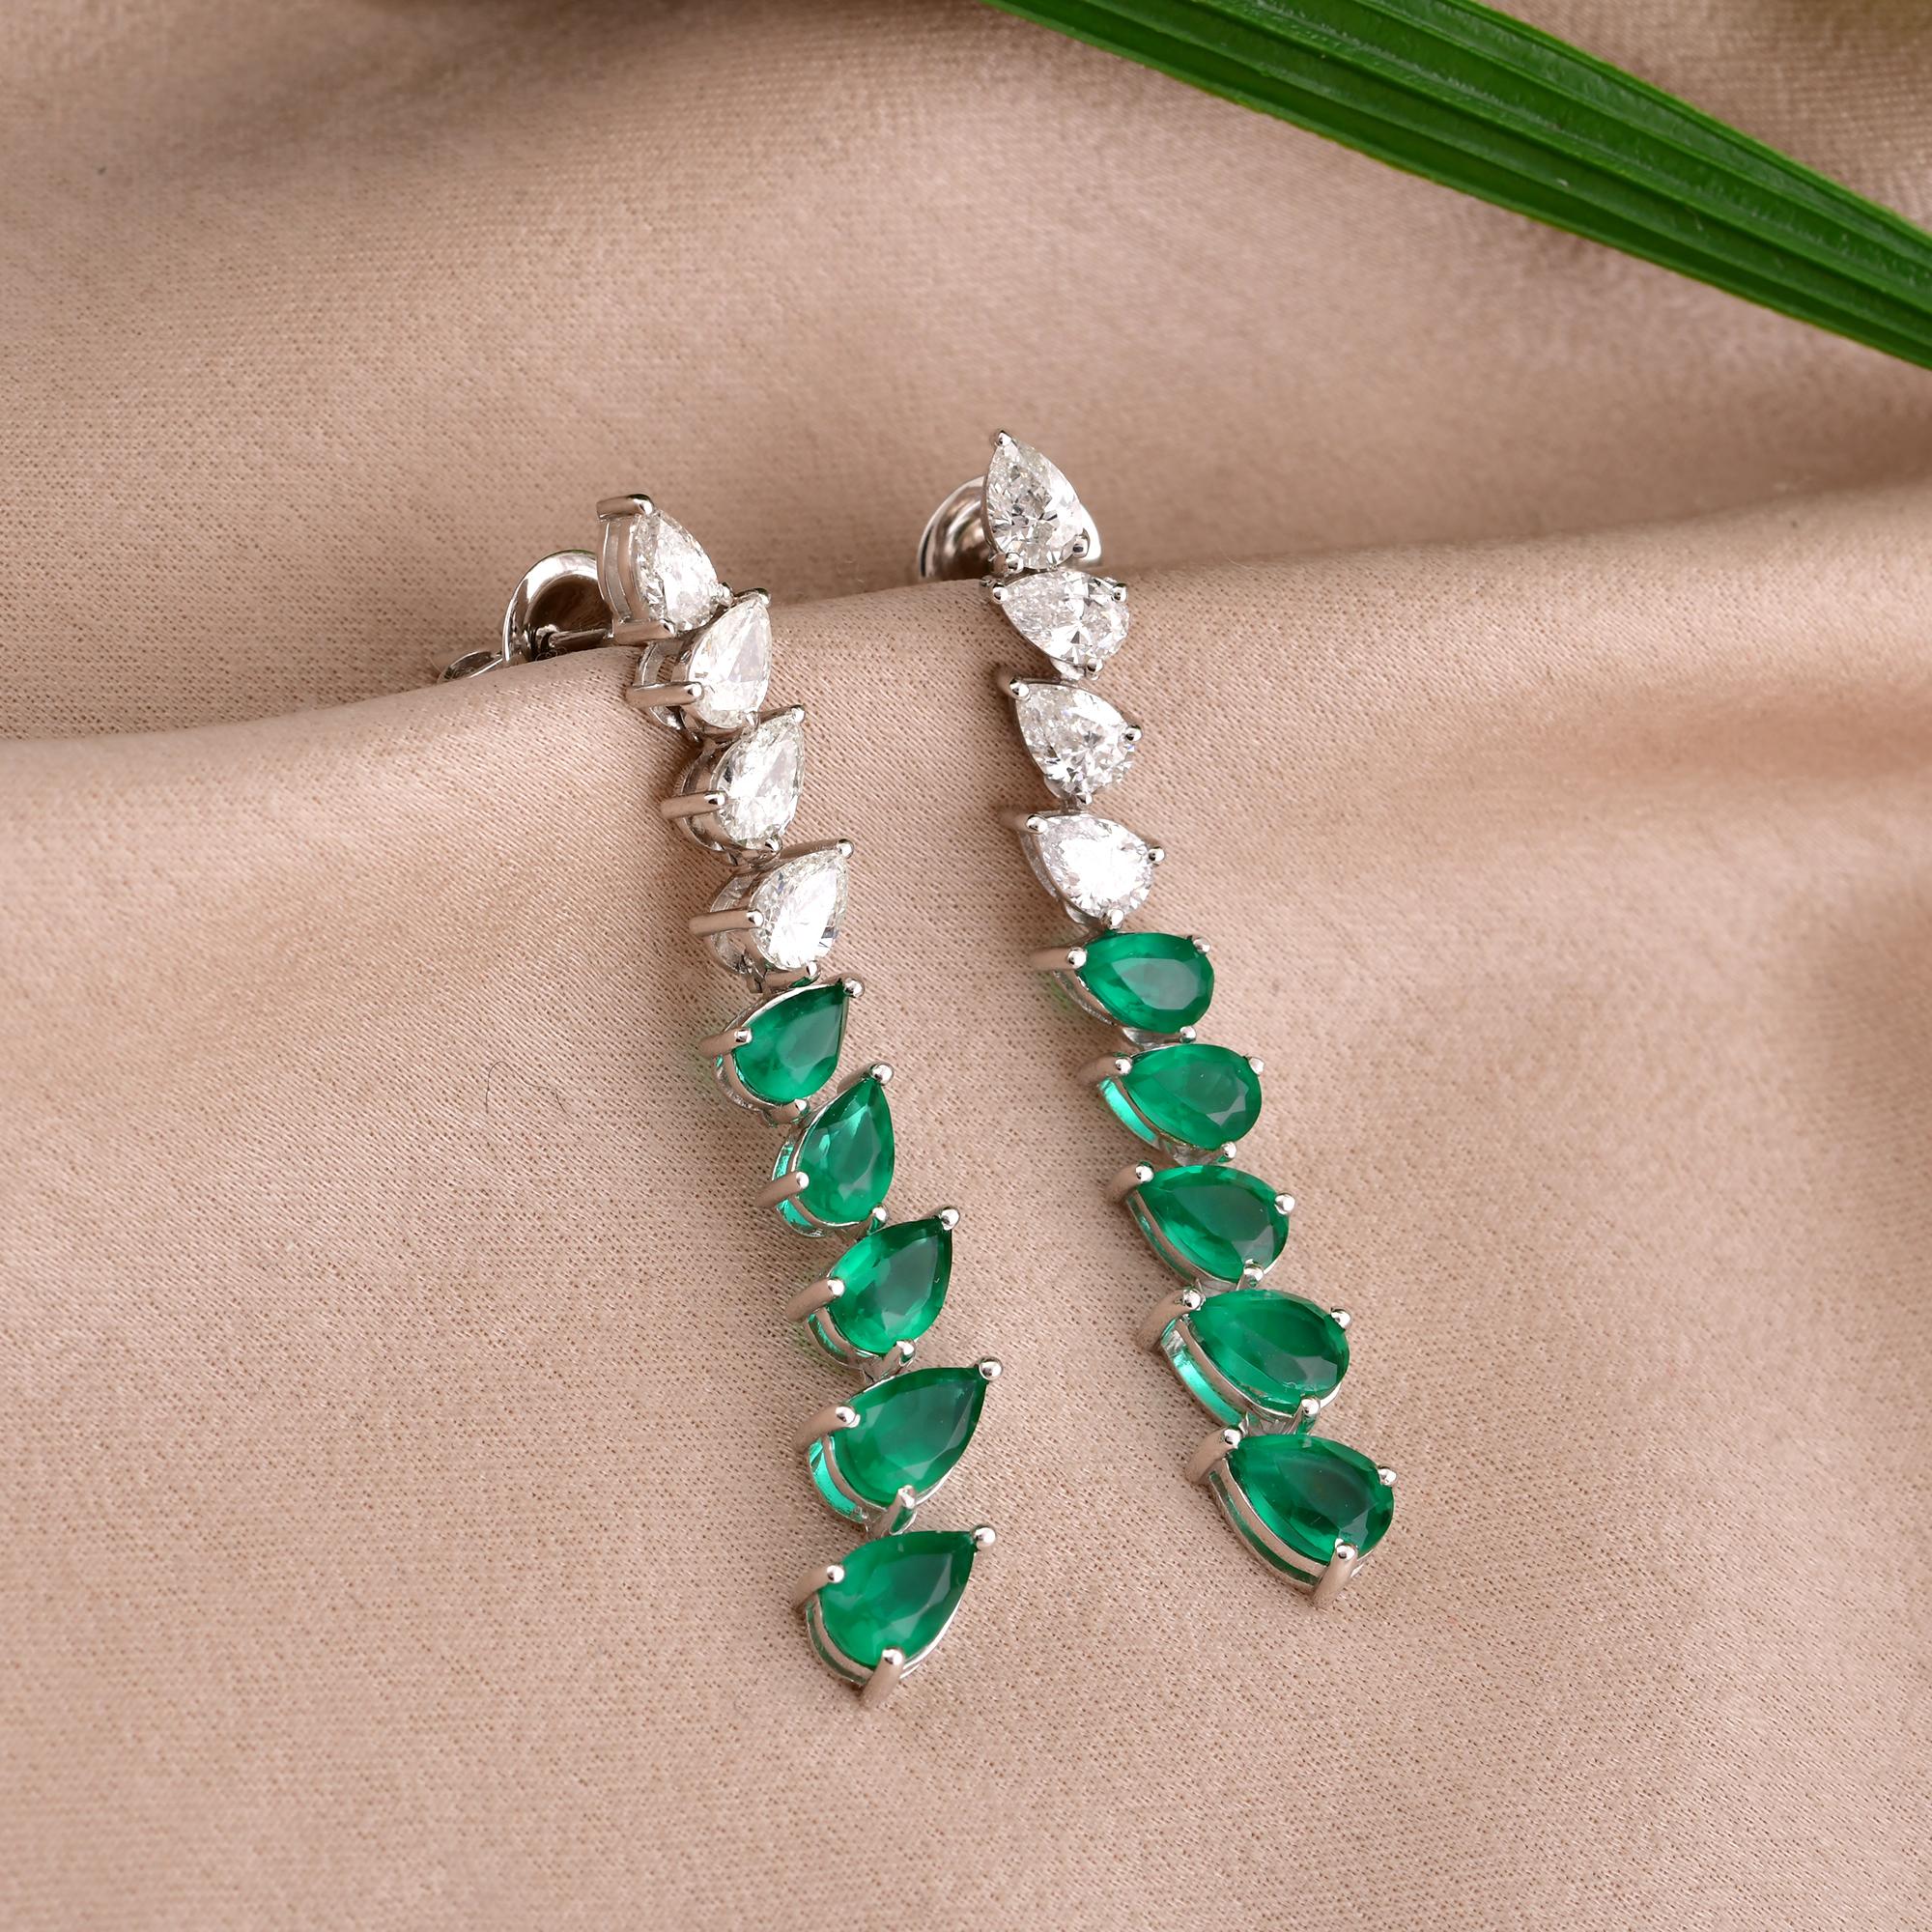 These Dainty Diamond Green Gemstone Dangle Earrings with 1.72 ct. Genuine Diamonds & 3.90 ct. Green Processed Gemstone are a promise of perfection and purity. These earrings are set in 18k Solid White Gold. You can choose these earrings in